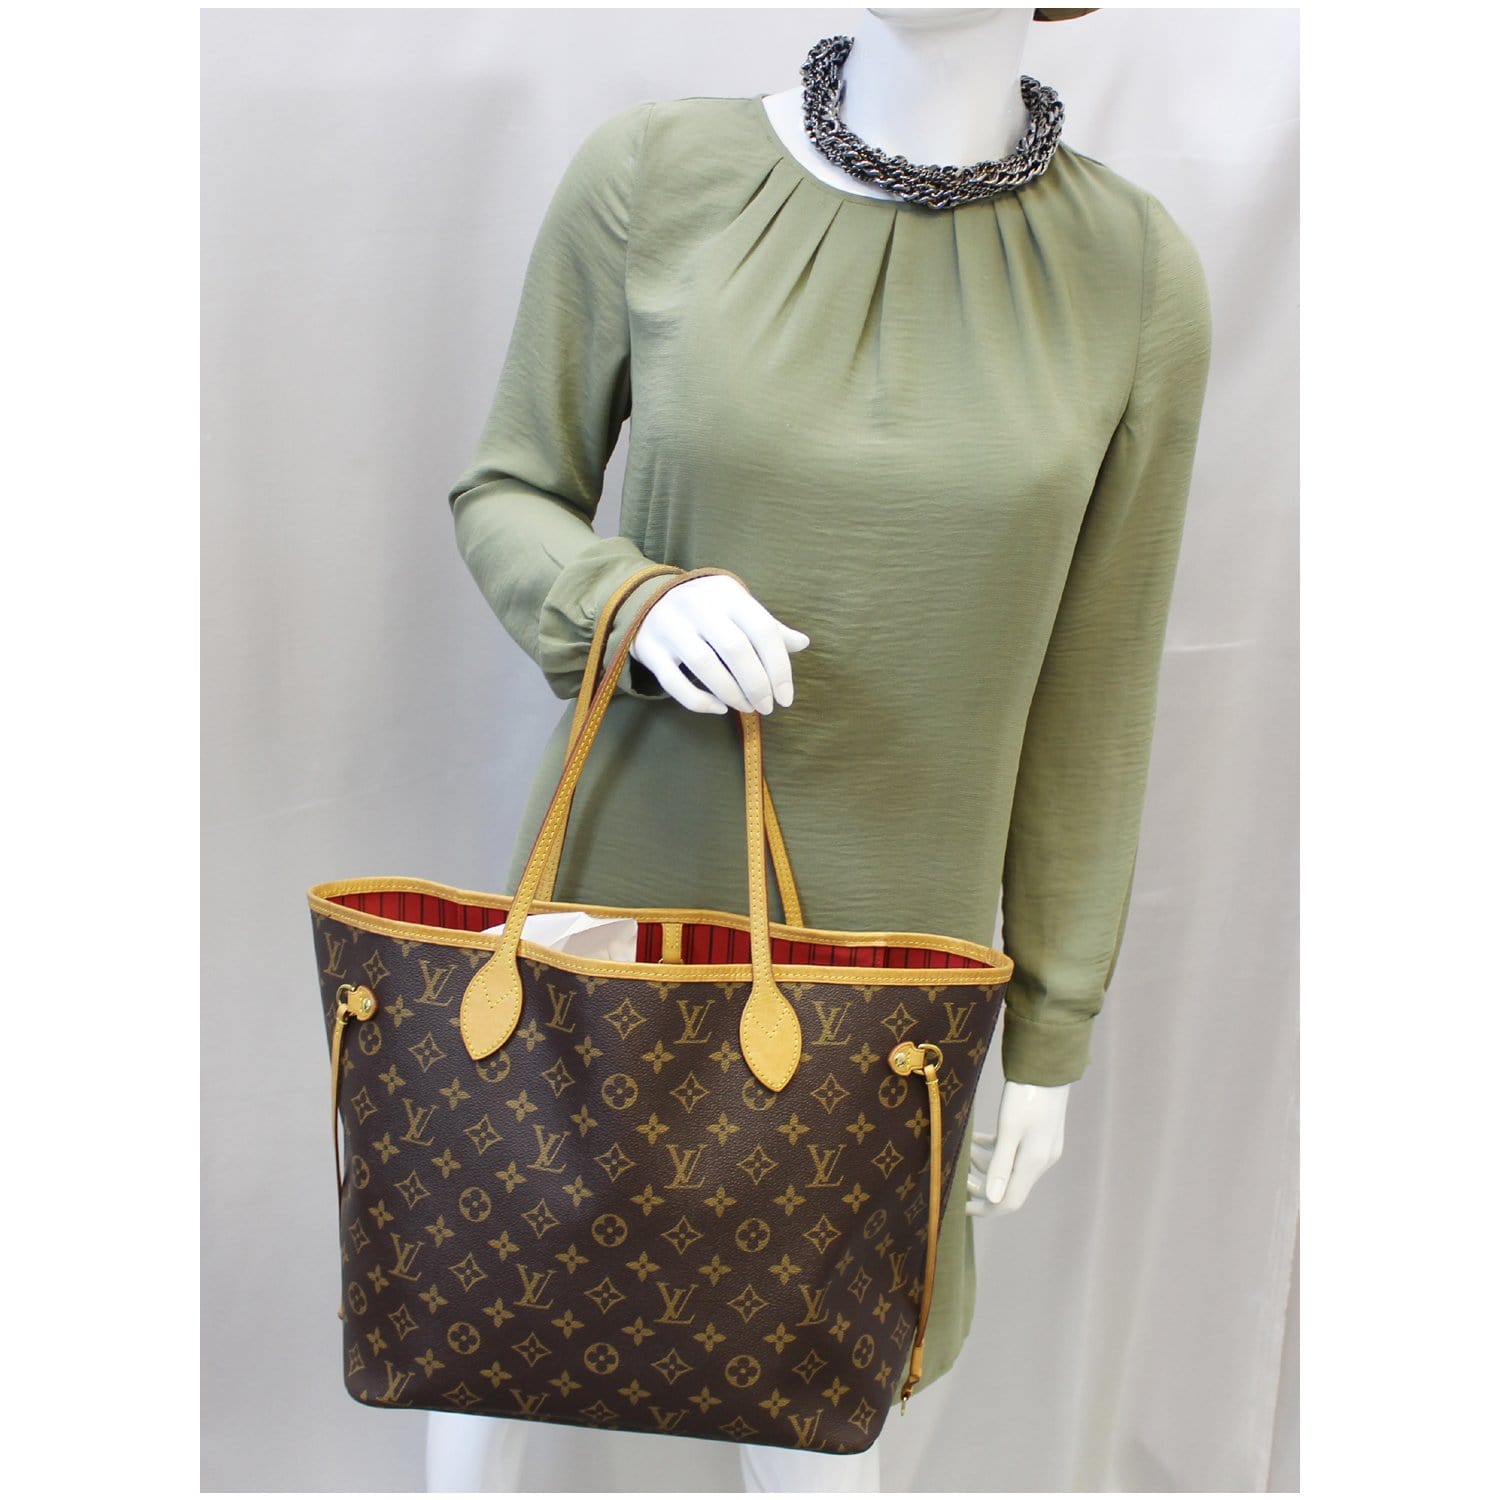 LOUIS VUITTON Monogram Neverfull MM Tote Bag Brown Turquoise M41601 90192196